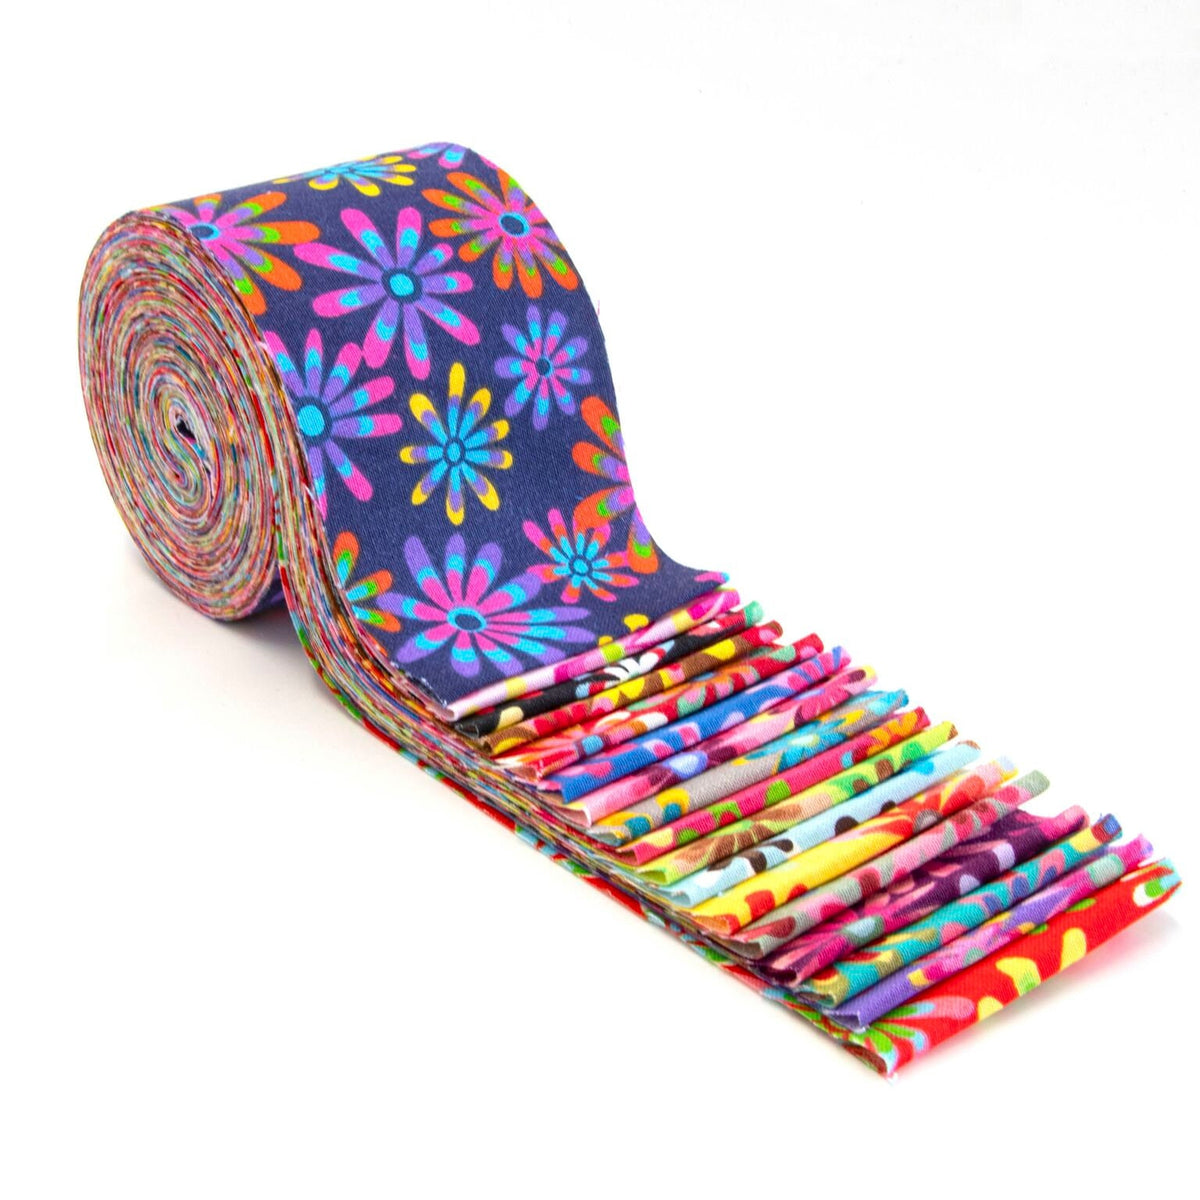 2.5 inch Crazy Daisy Strip Roll 100% cotton fabric quilting strips 17 pieces